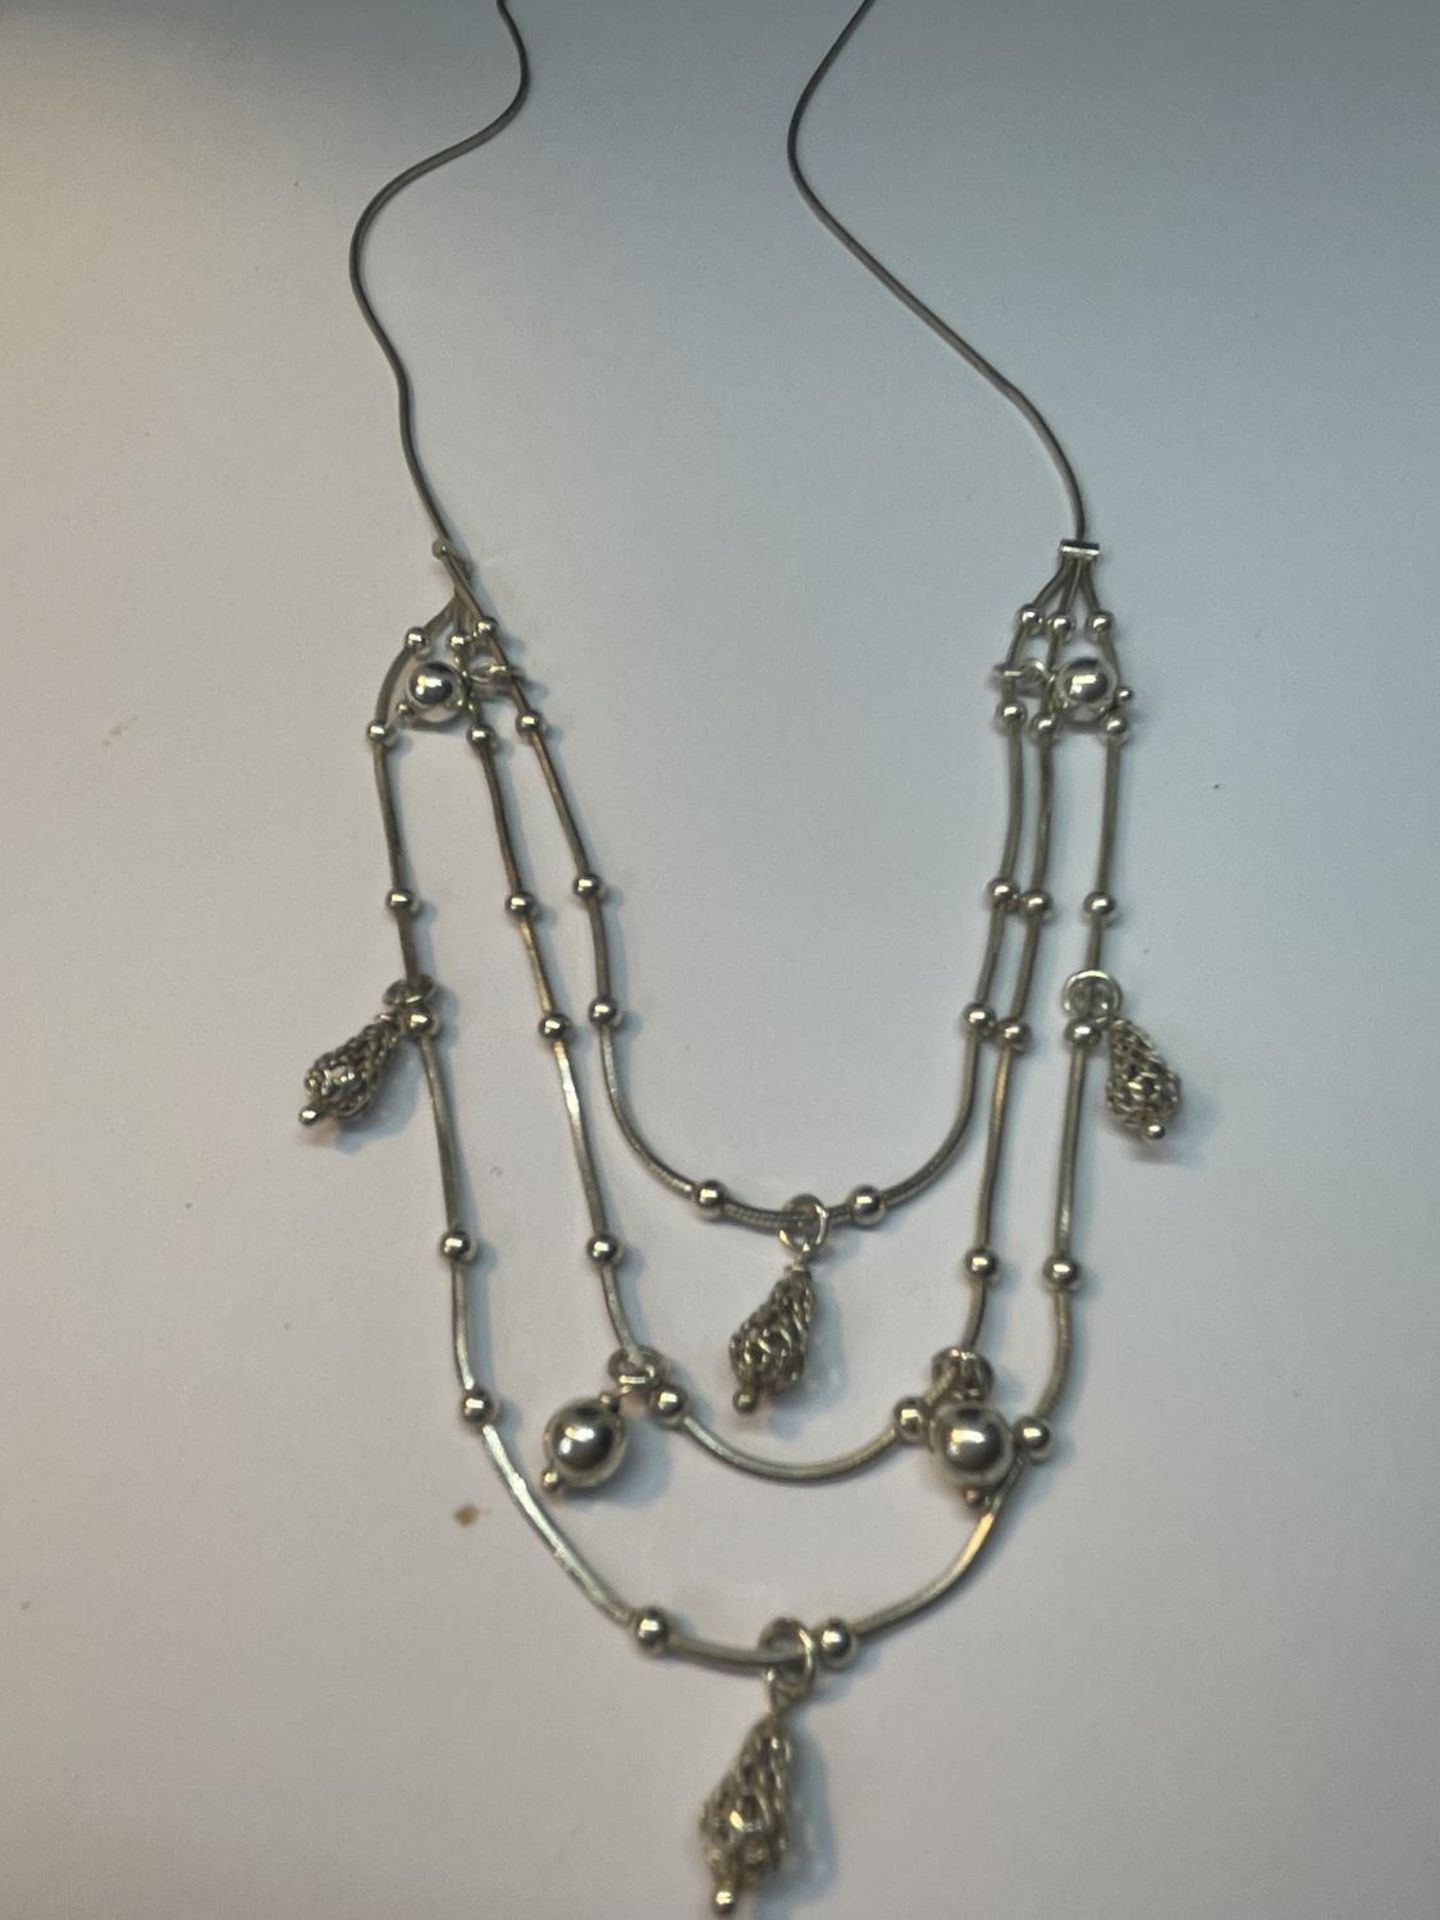 A MARKED SILVER NECKLACE WITH A THREE STRAND DESIGN IN A PRESENTATION BOX - Image 2 of 4